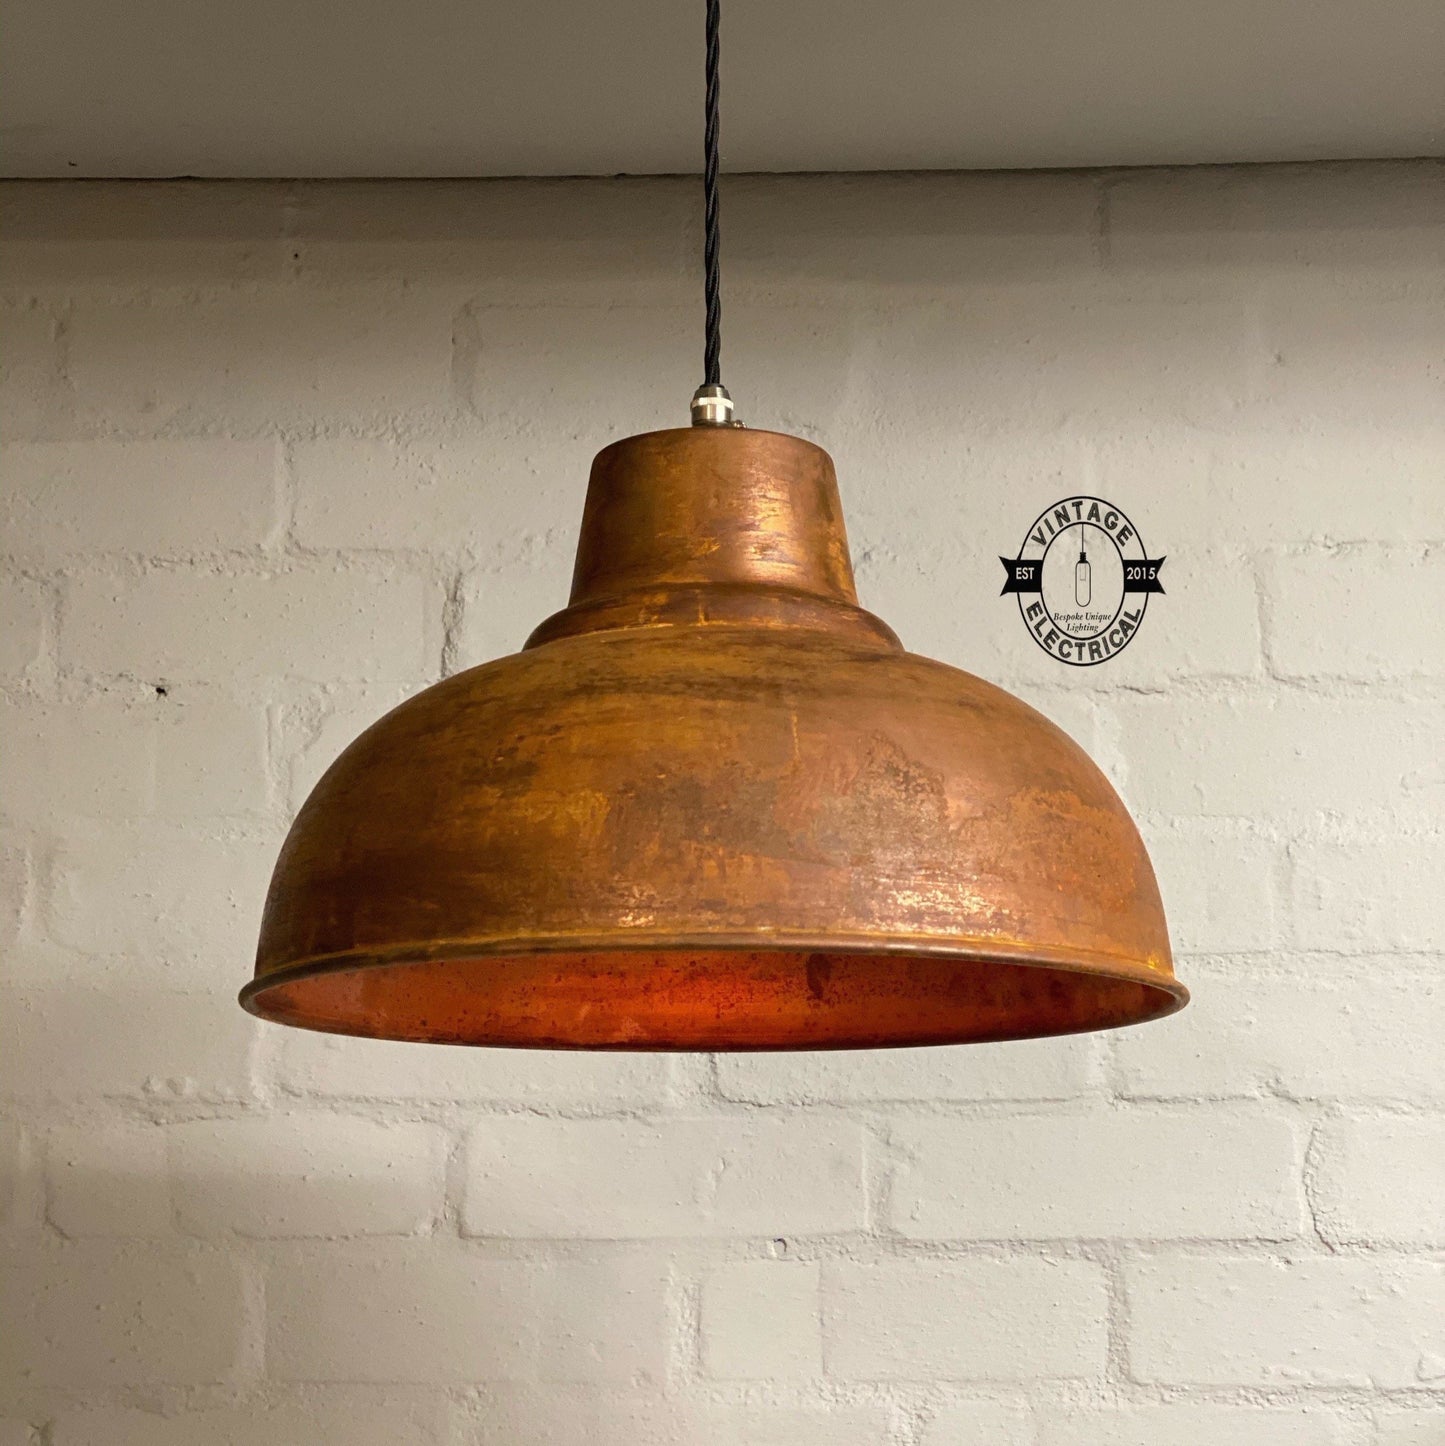 Salthouse XL ~ Rusted Solid Industrial Shade Pendant Set Light | Ceiling Dining Room | Kitchen Table | Vintage Filament Bulb 14.5 Inch